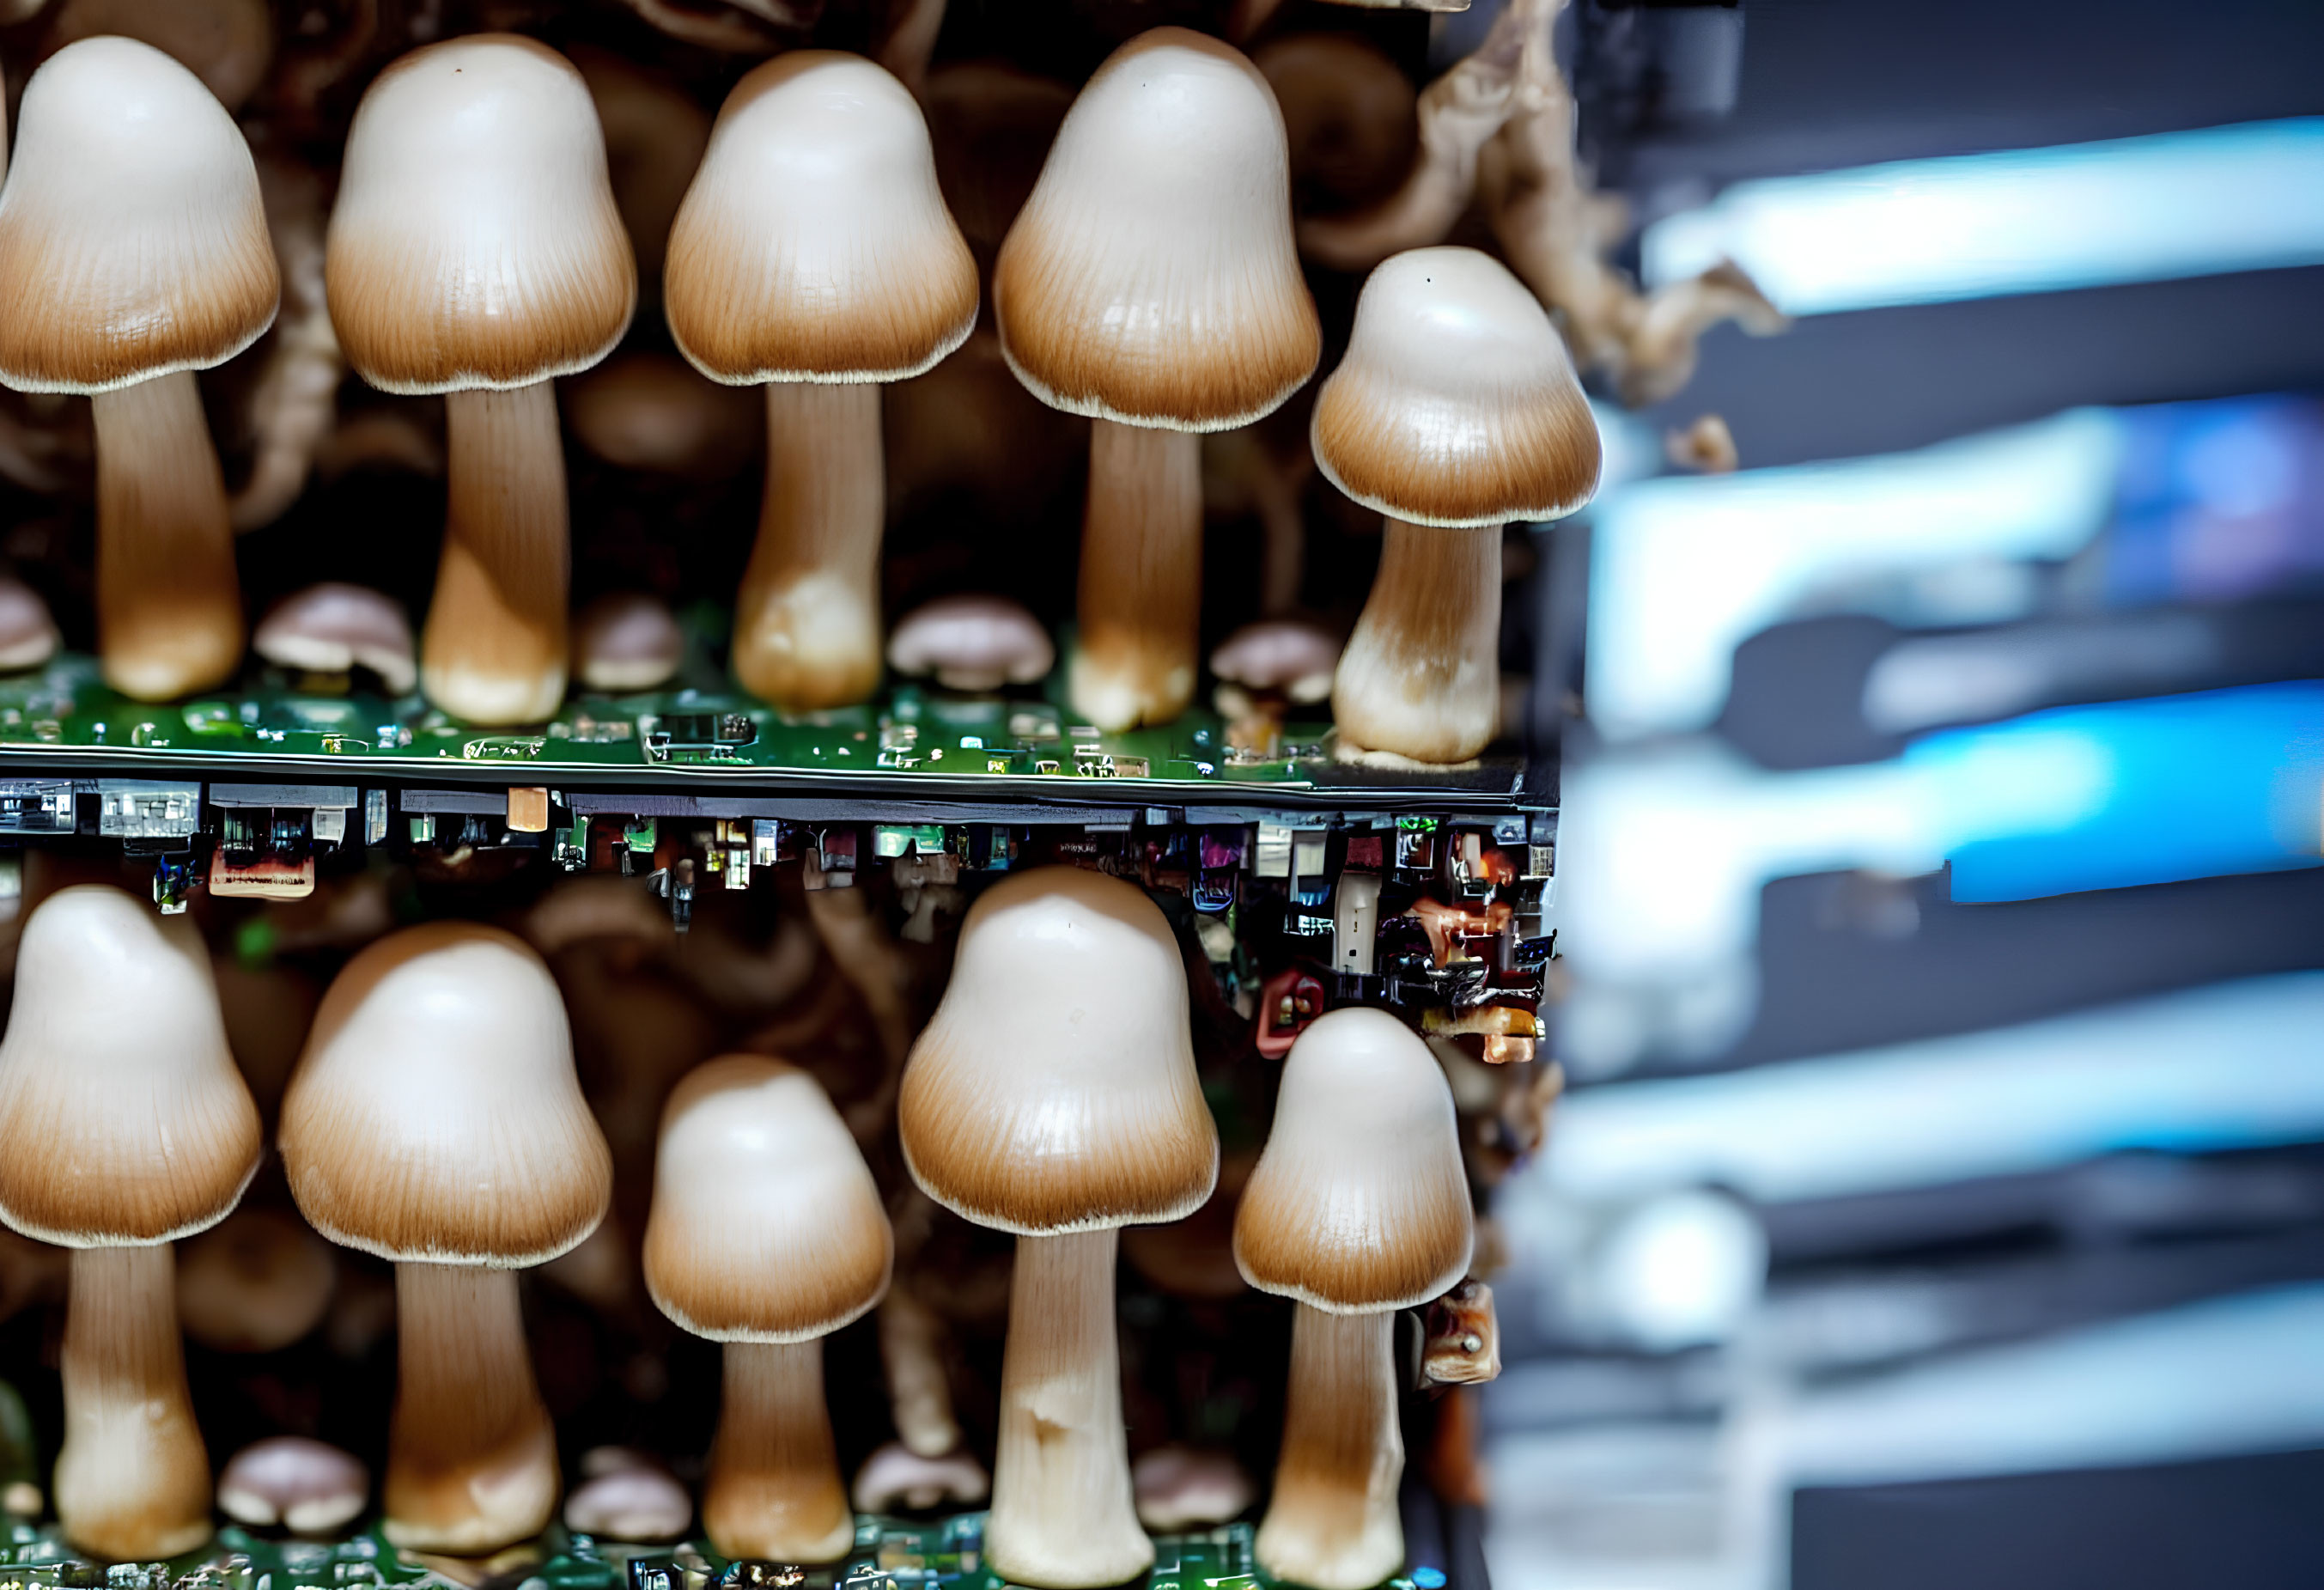 Mushrooms growing on green circuit board with electronic components